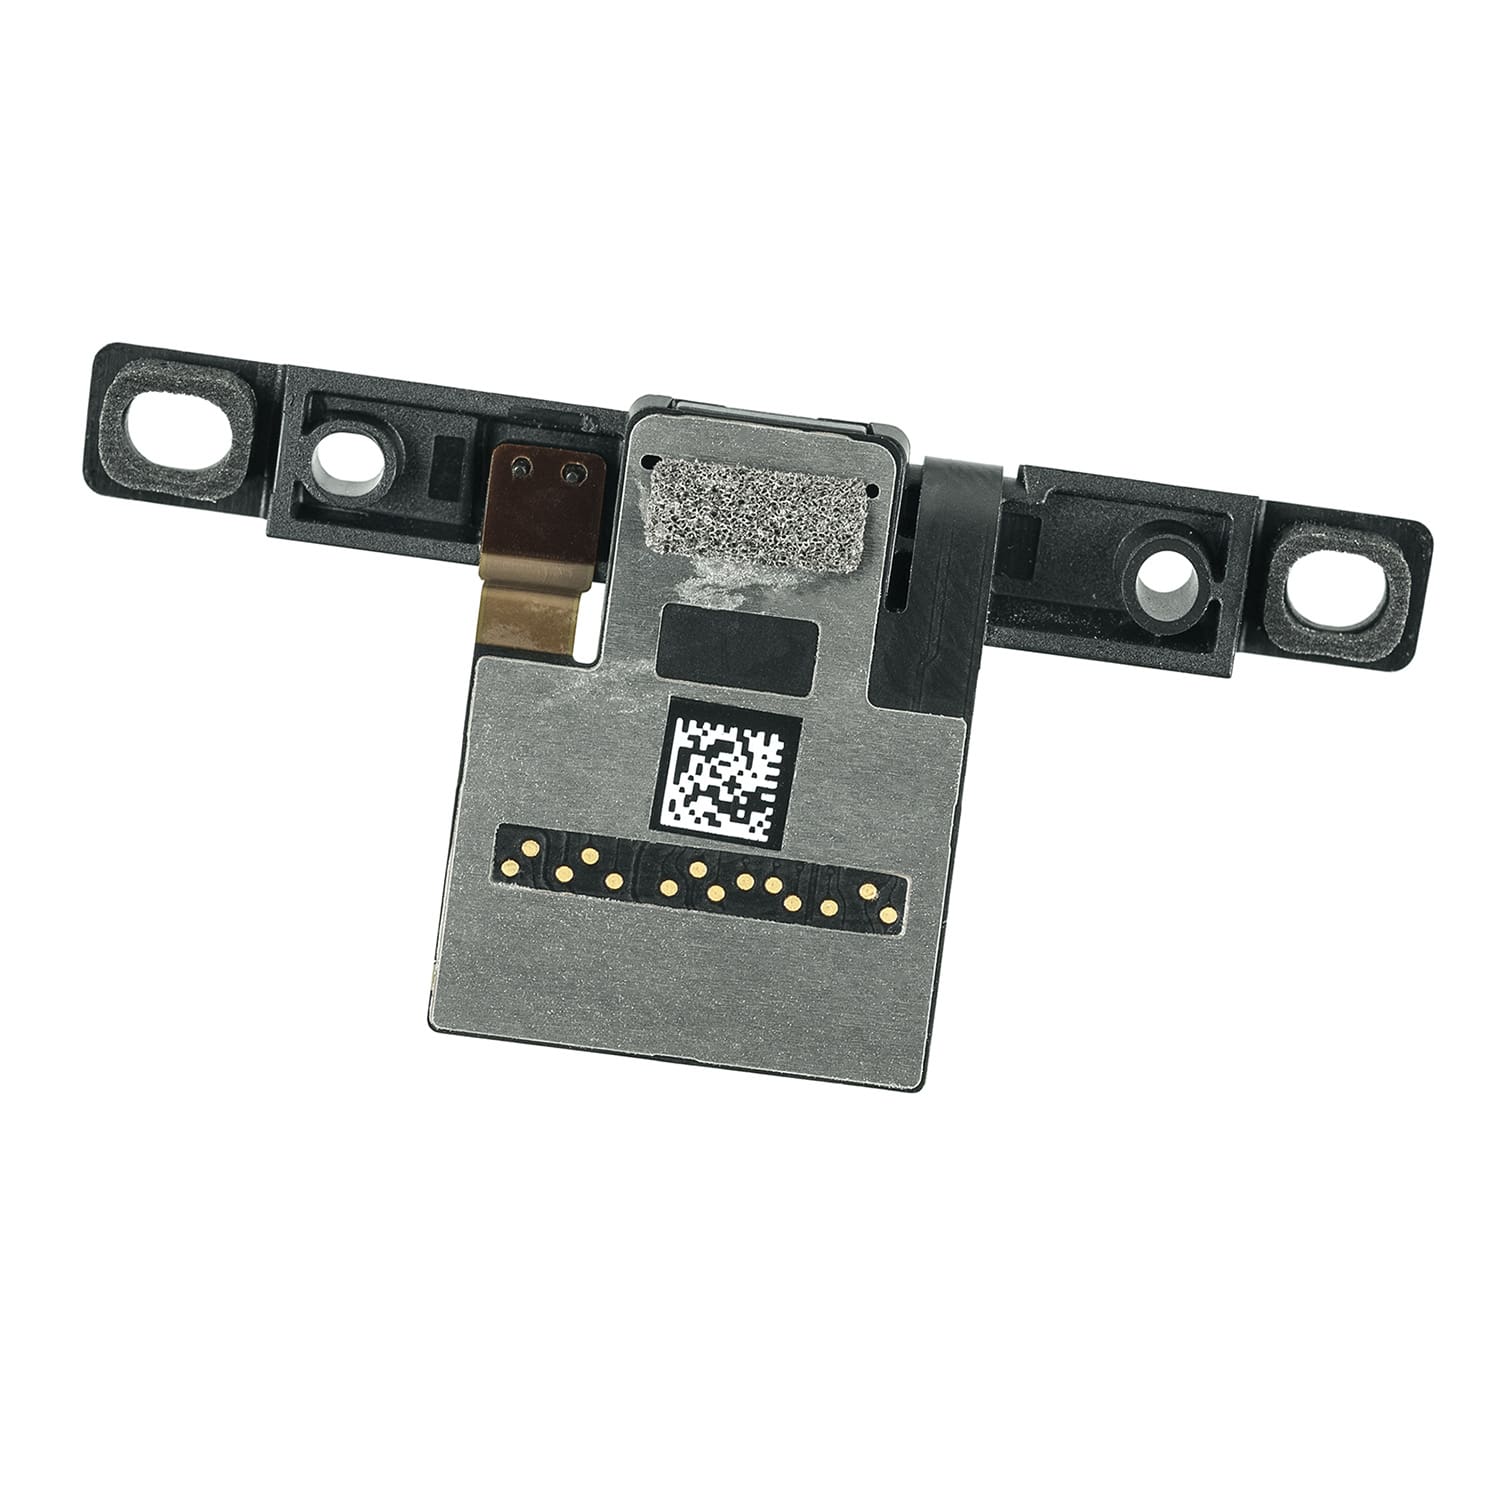 FACE TIME CAMERA  FOR IMAC 27" A1419 (LATE 2015)